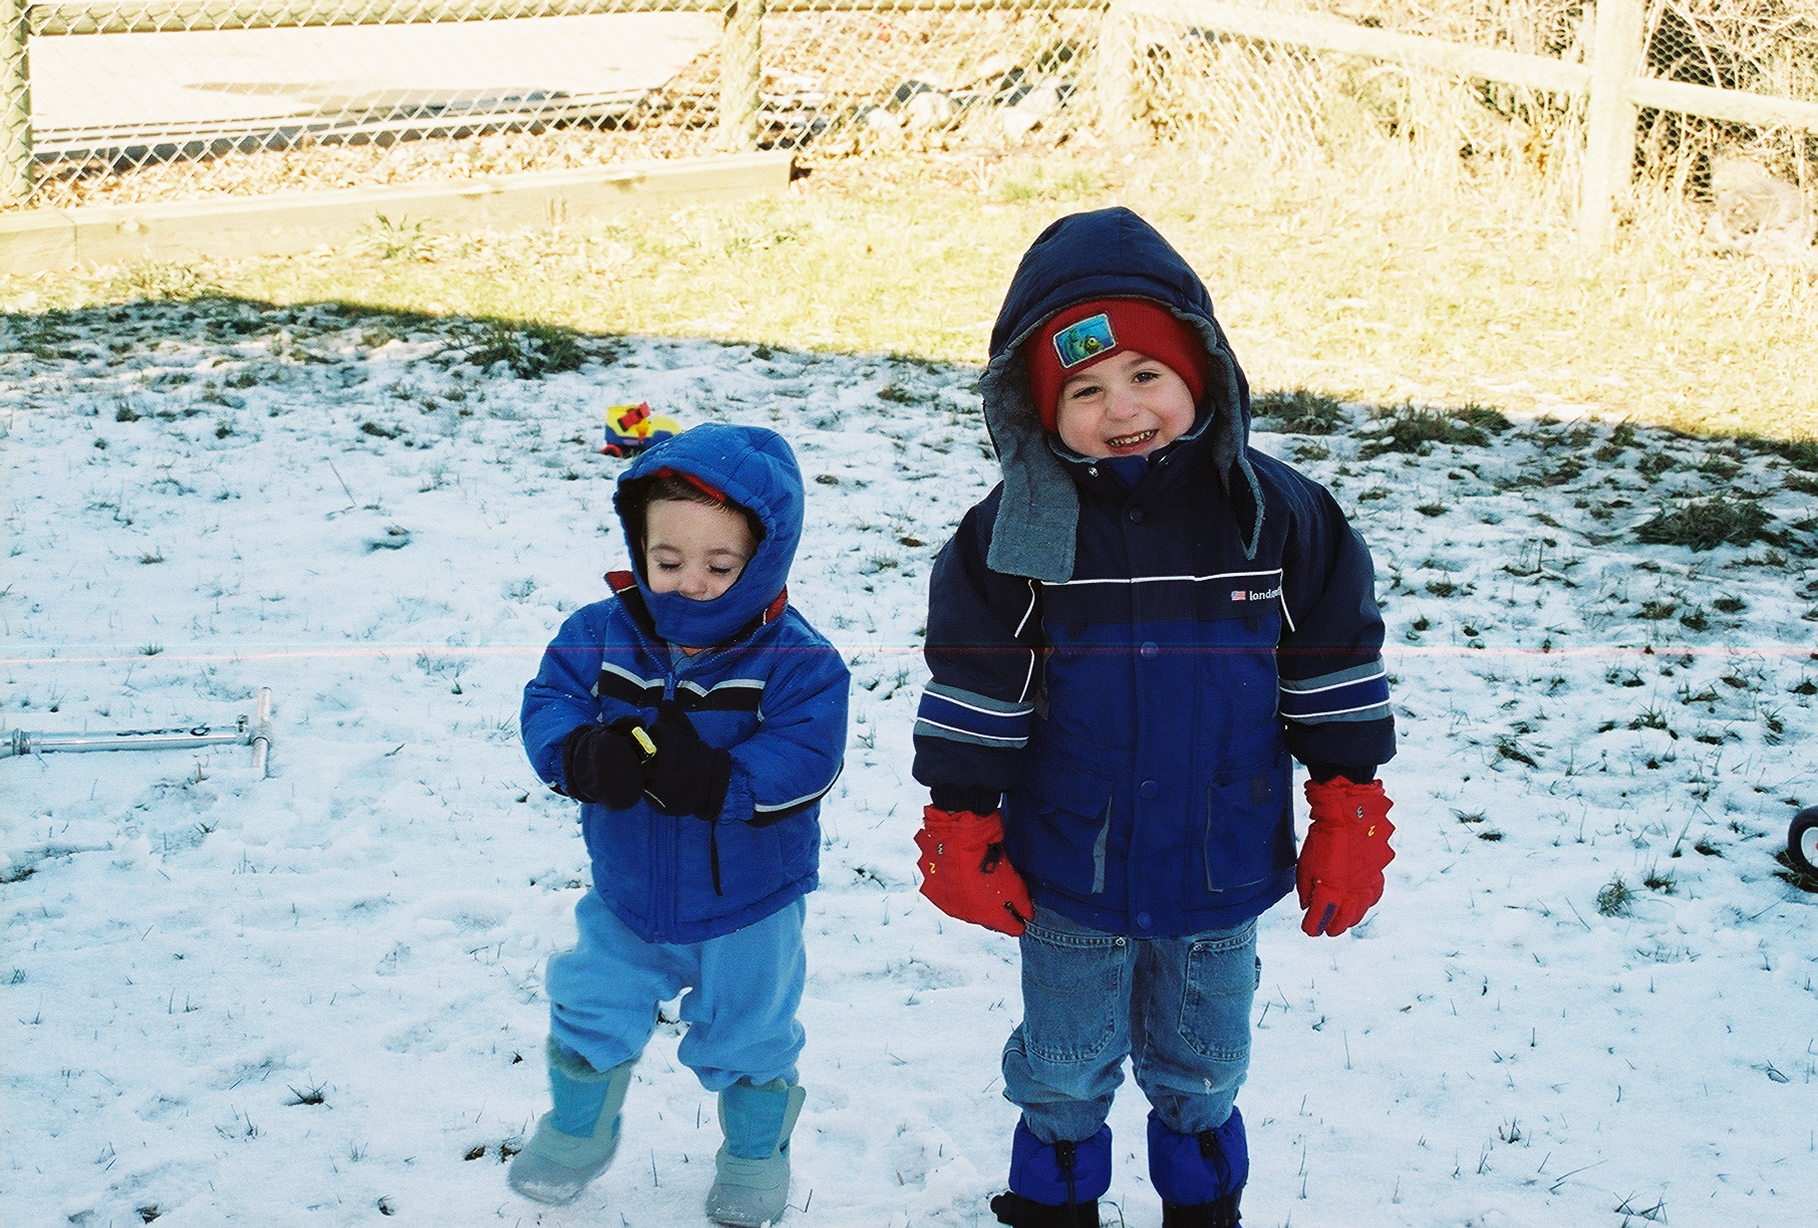 Nevan and Liam Doig when the snow started melting